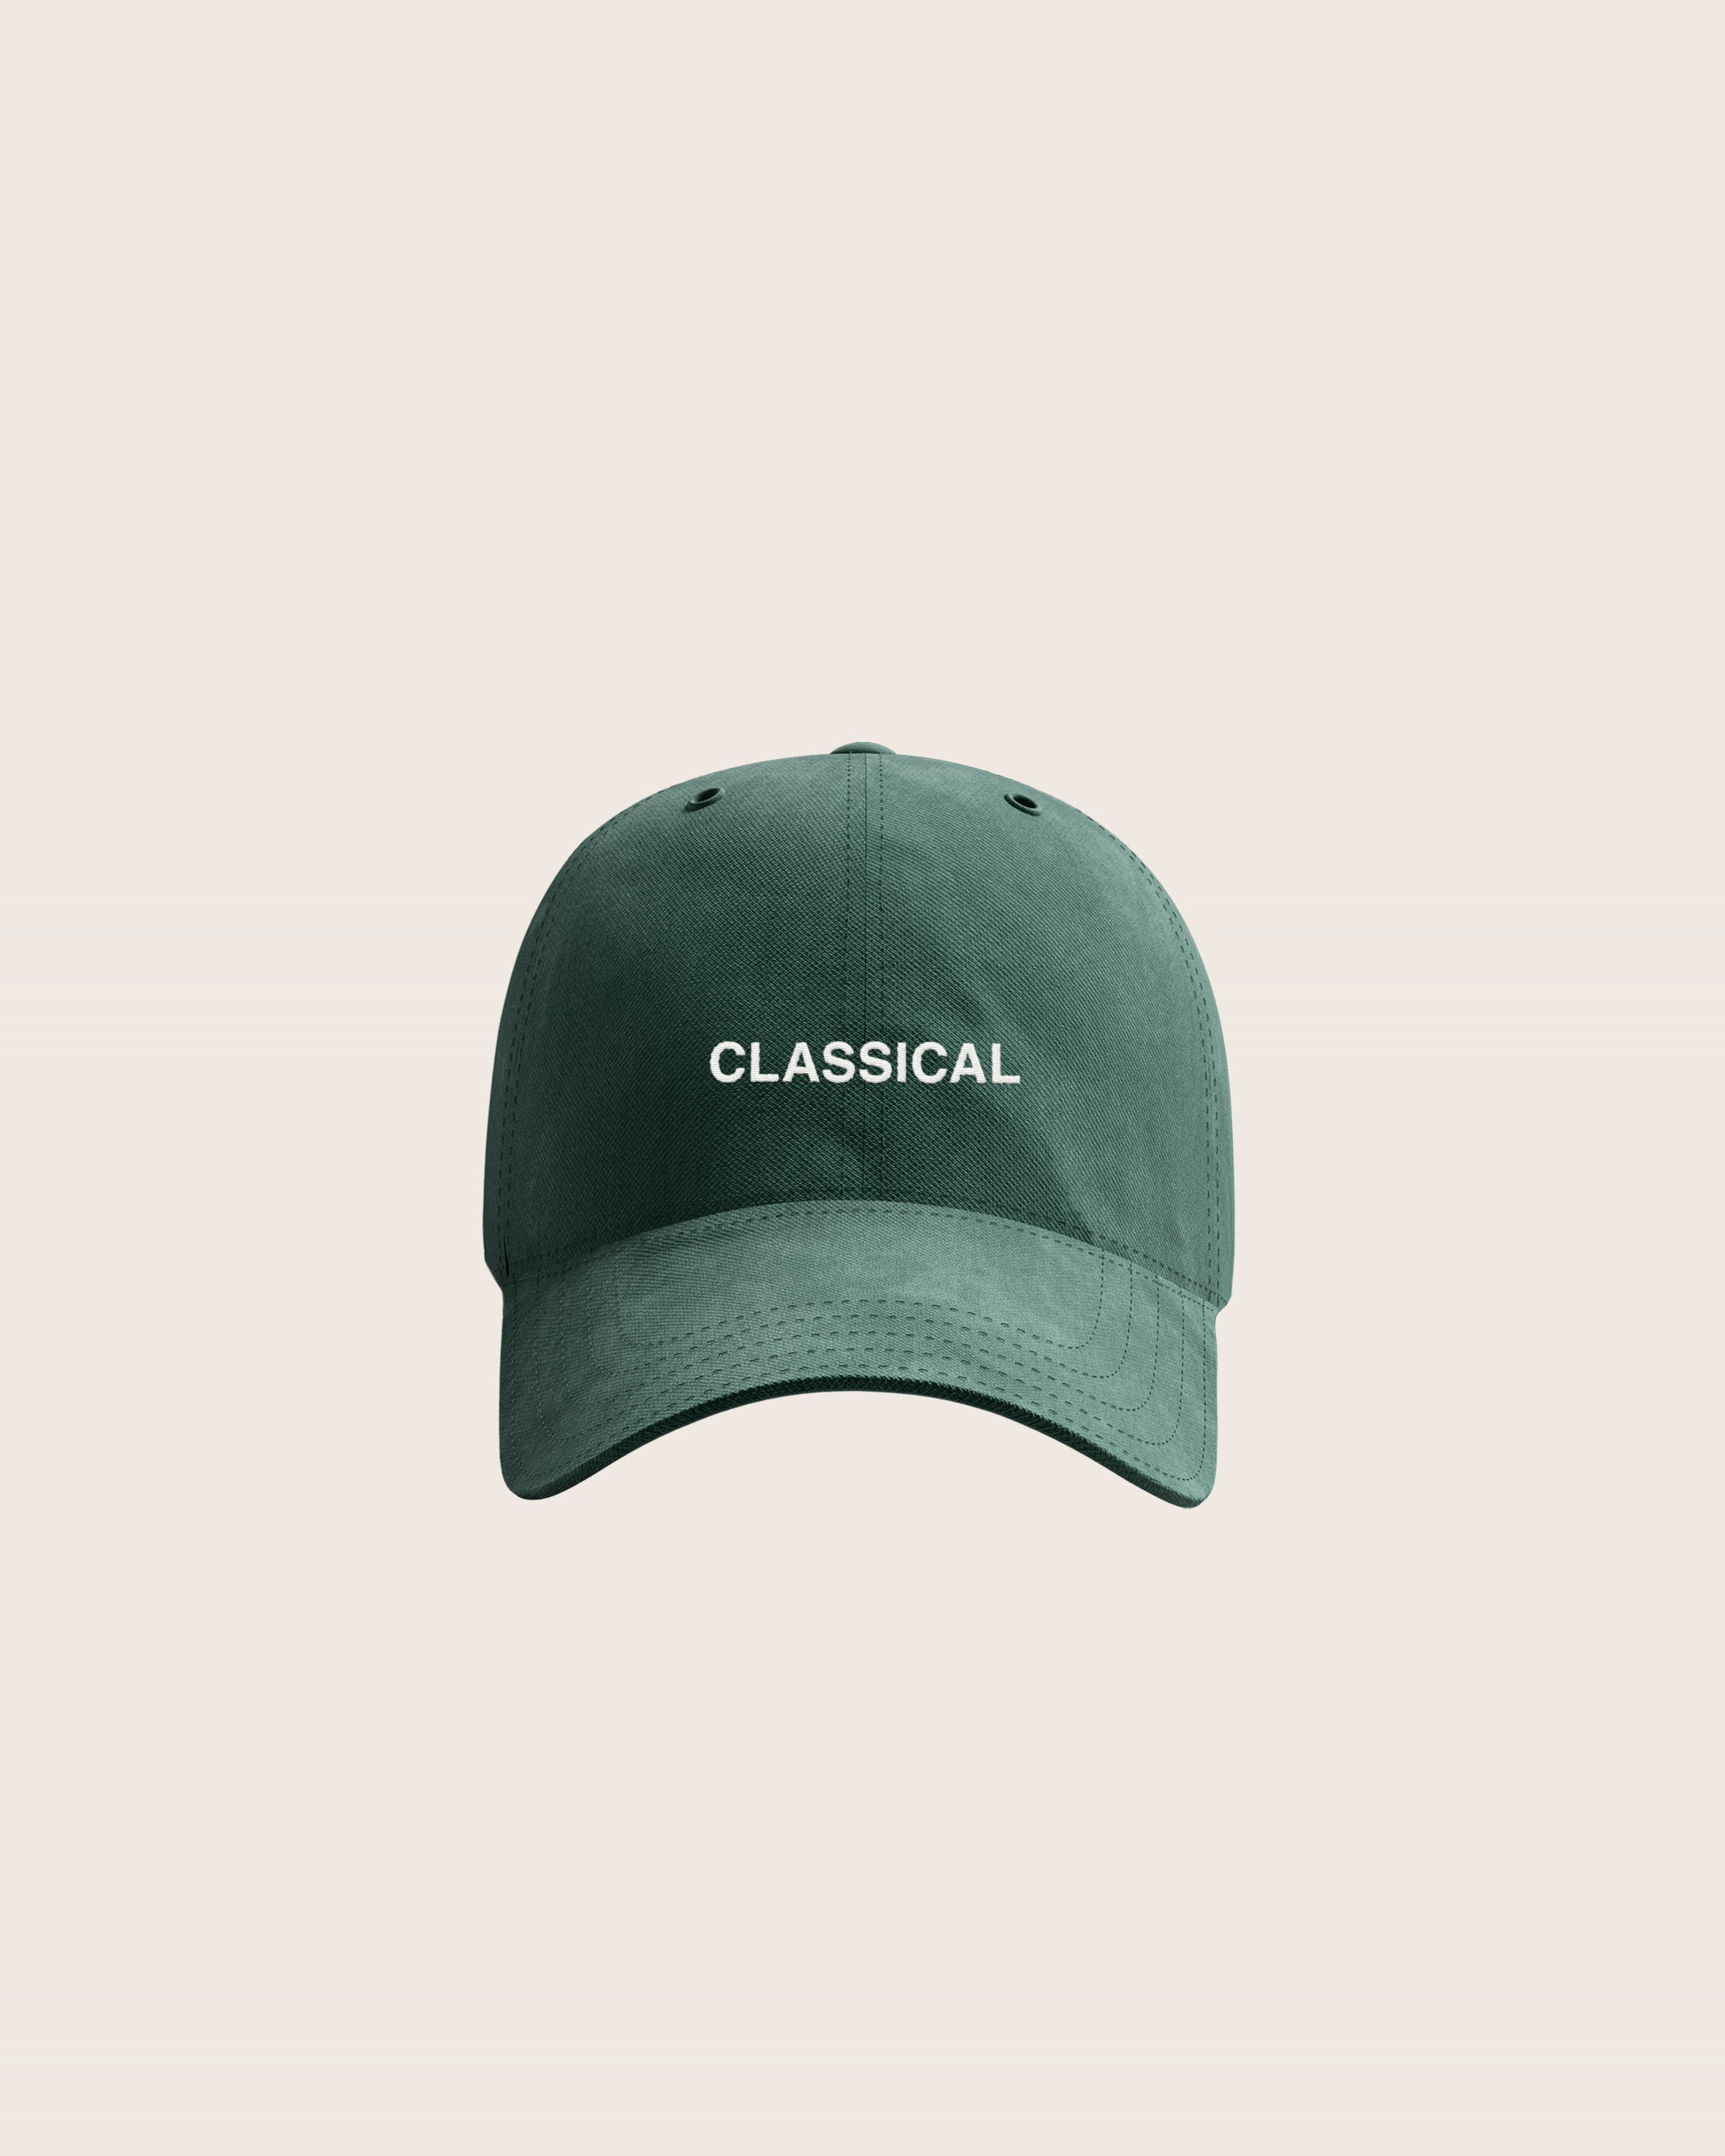 Green Baseball Cap / Dad Hat with Classical Art Movement Text Embroidery on Front. 100% Cotton.